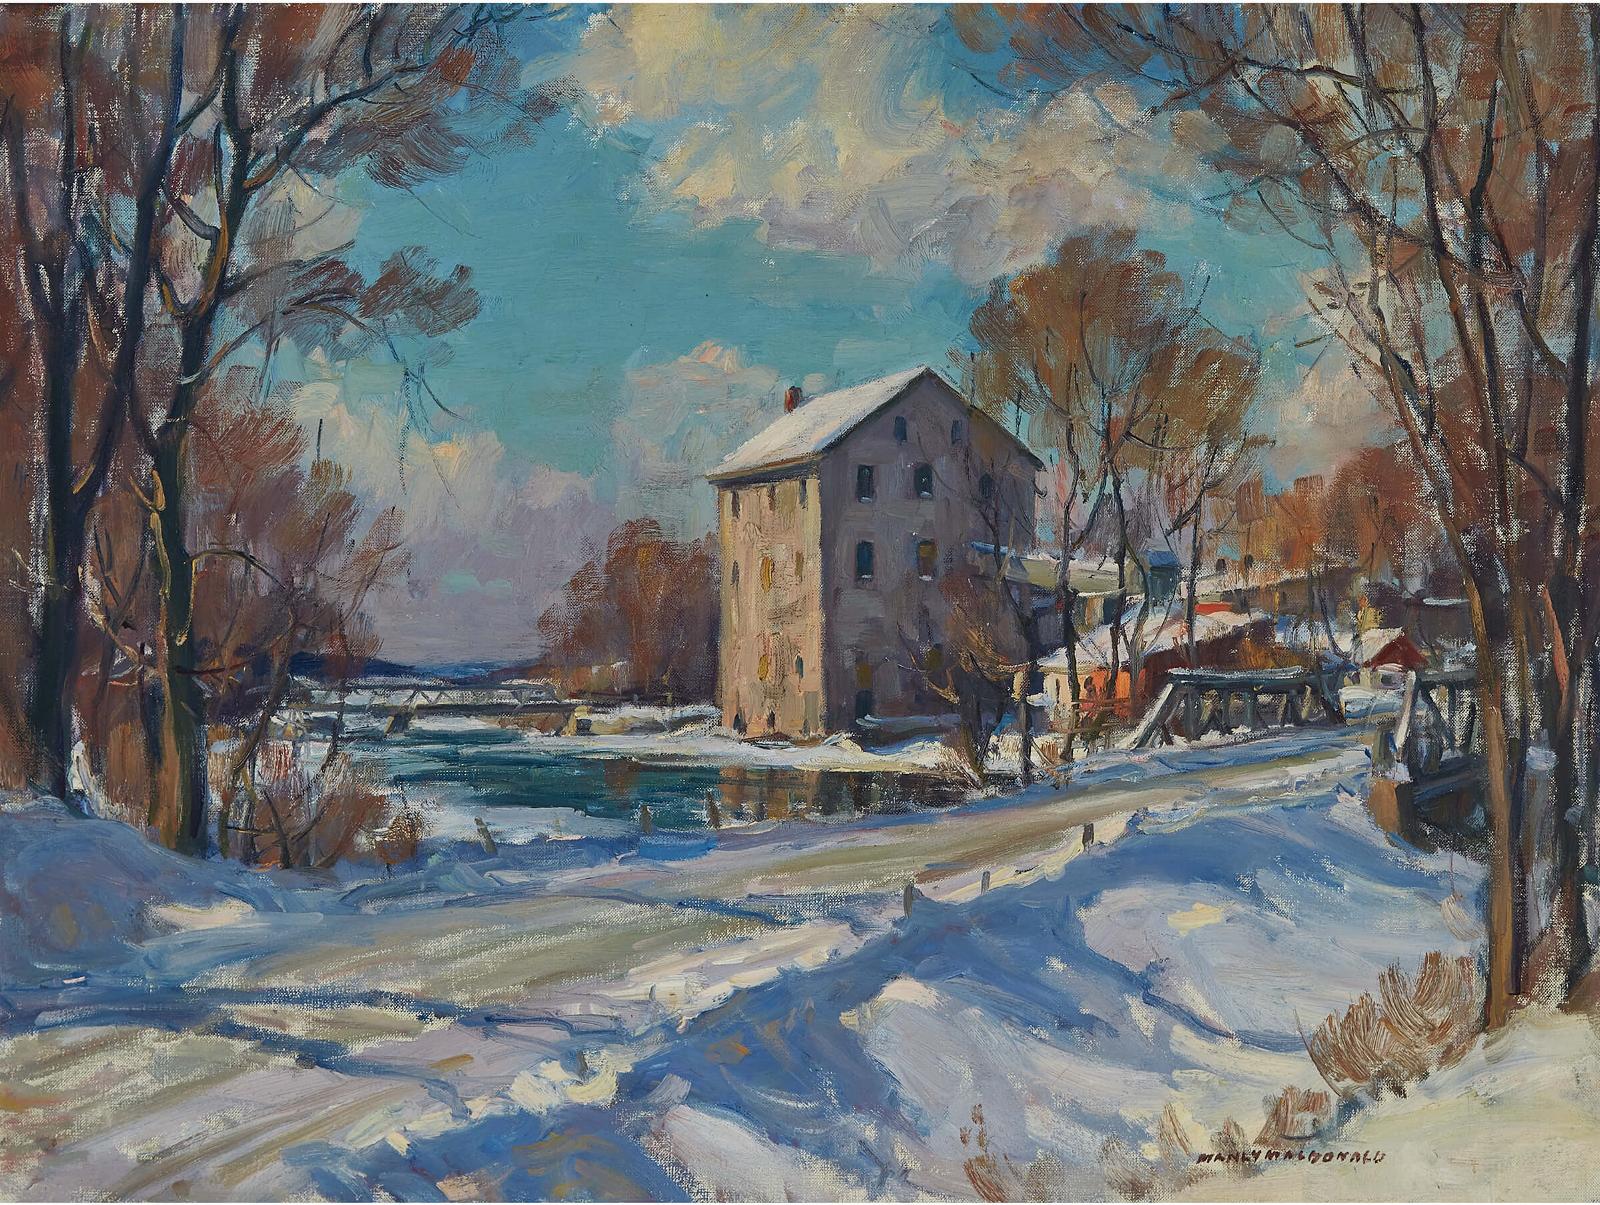 Manly Edward MacDonald (1889-1971) - Mill In Winter